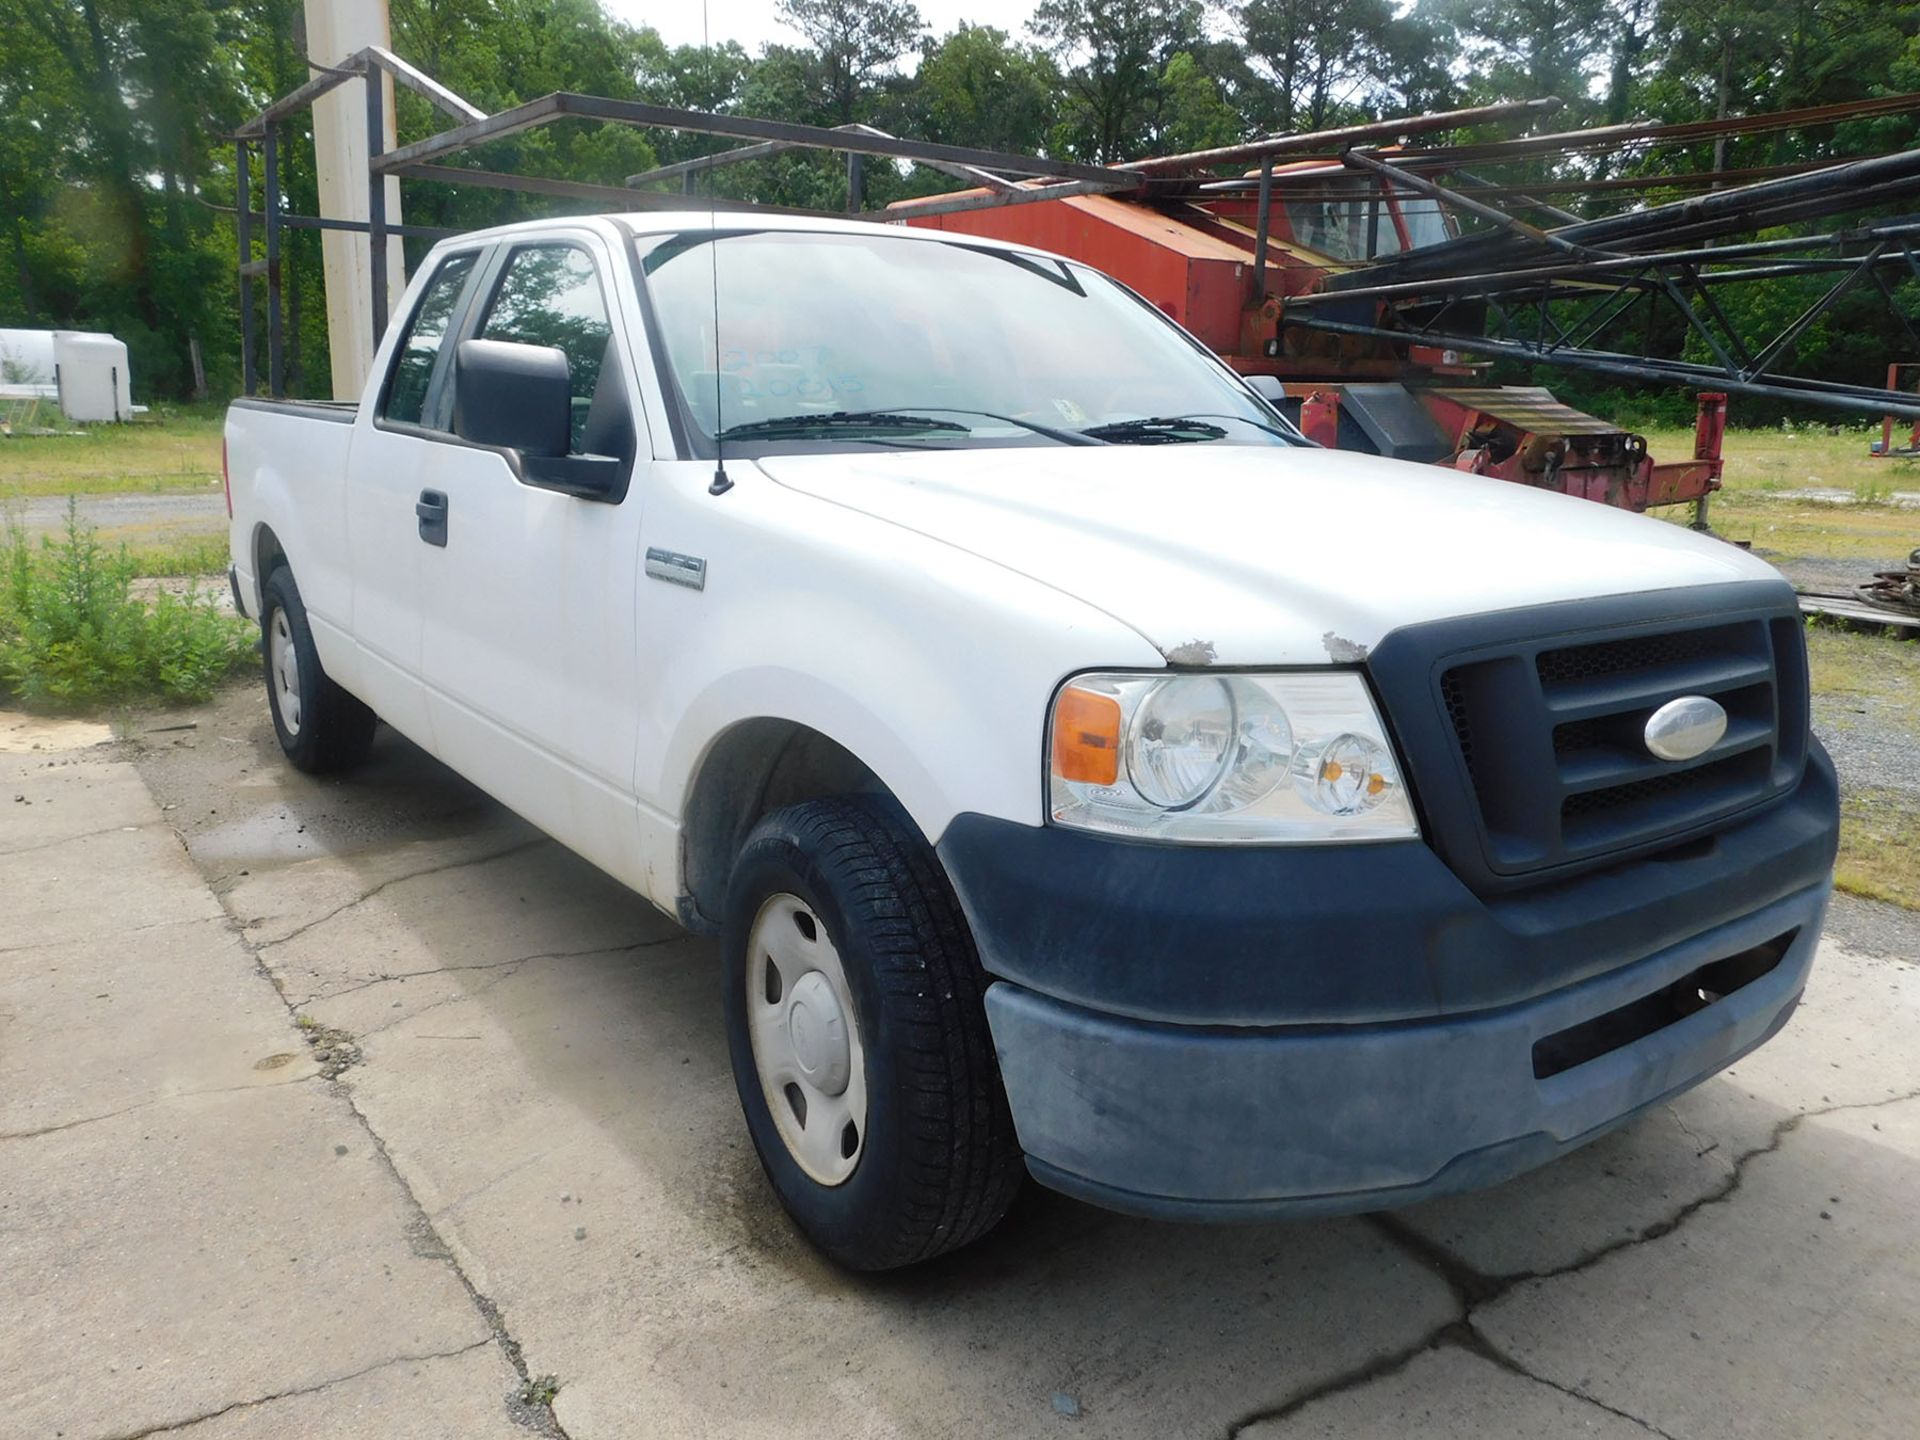 2007 F-150 XL TRITON TRUCK WITH WORK RACK; VIN 1FTRX12WX7NA52548 - Image 4 of 4